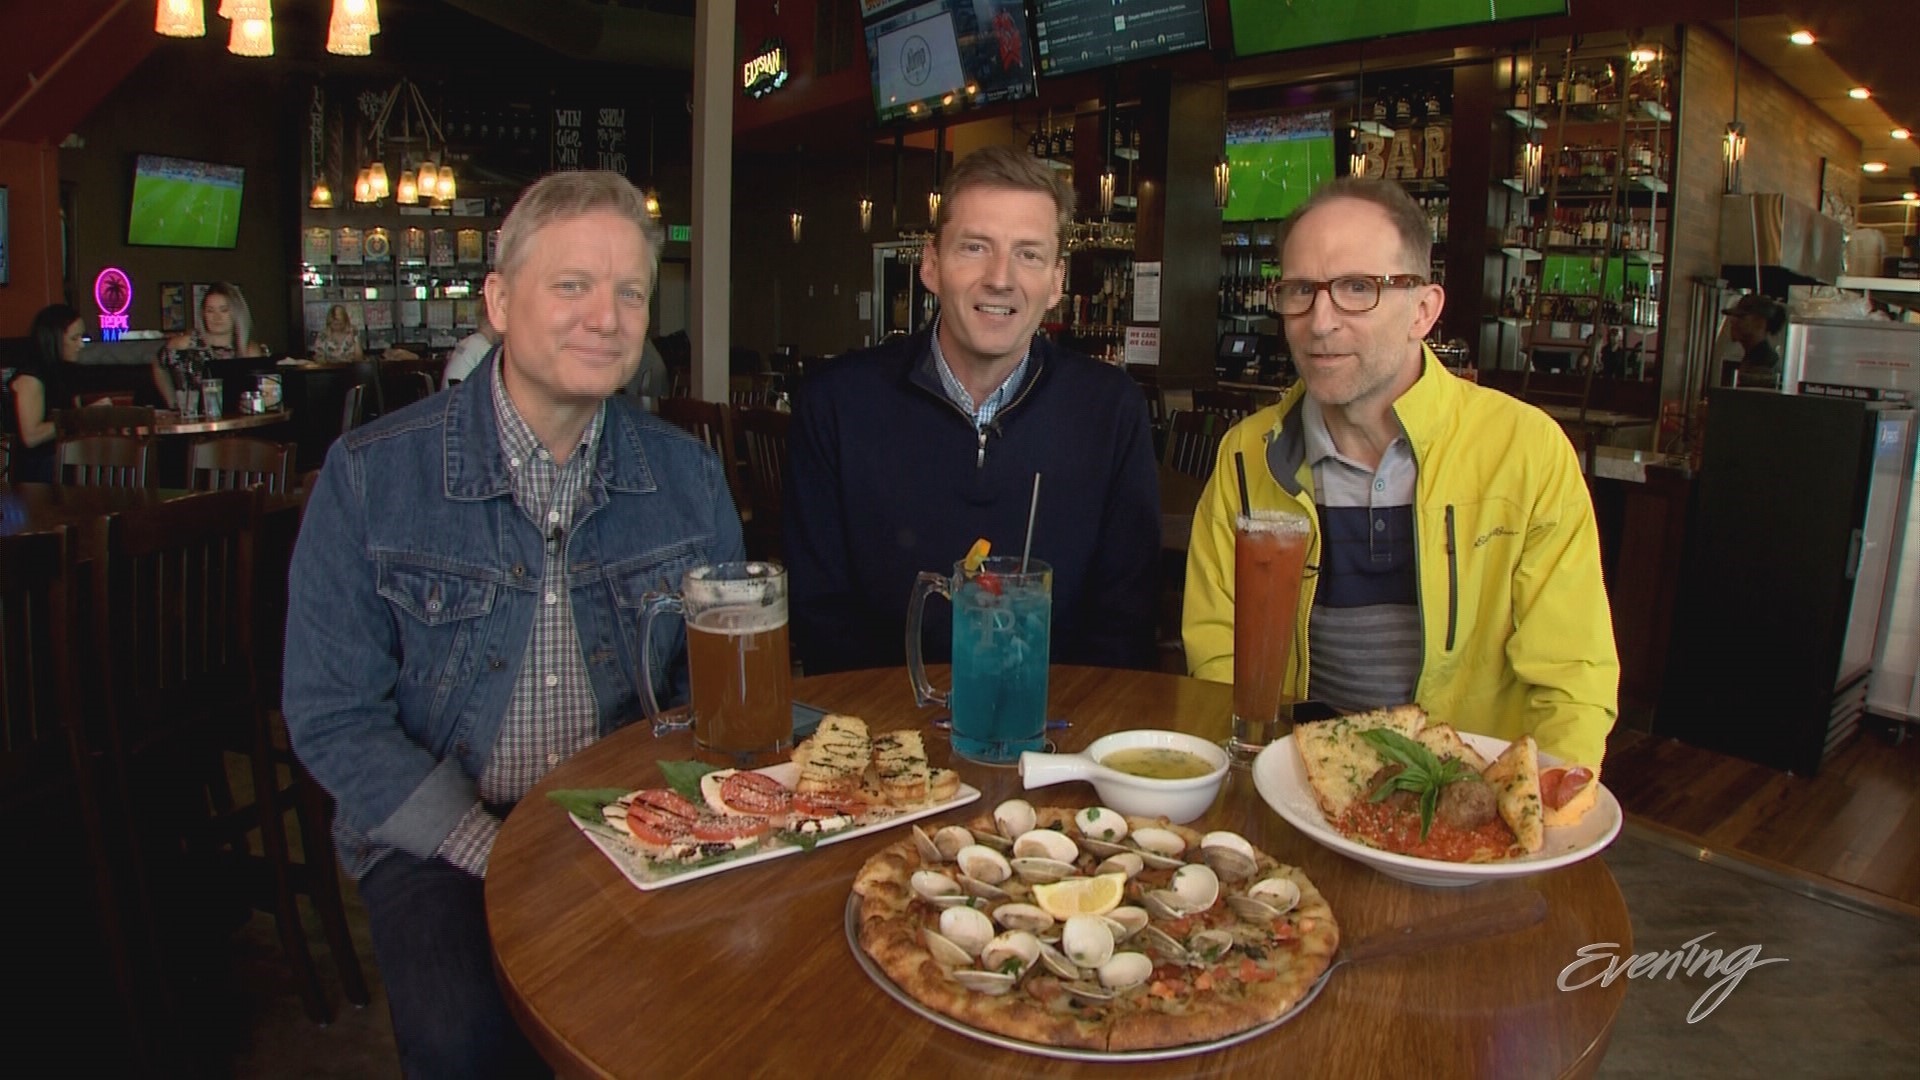 Saint Bryan, Jim Dever, and Michael King host from Farelli's Pizza in Point Ruston. FEATURING: John's Beachcombing Museum in Forks, A Toy Story 4 Giveaway, Director of the Movie, 'Shaft', The Rapinoe Sisters, BOWW Best Dog Park, Hometown Candle Co. & Gifts' Grammy Candles, That's a Thing? and a Short Hike to Stump House at Kitsap Peninsula.